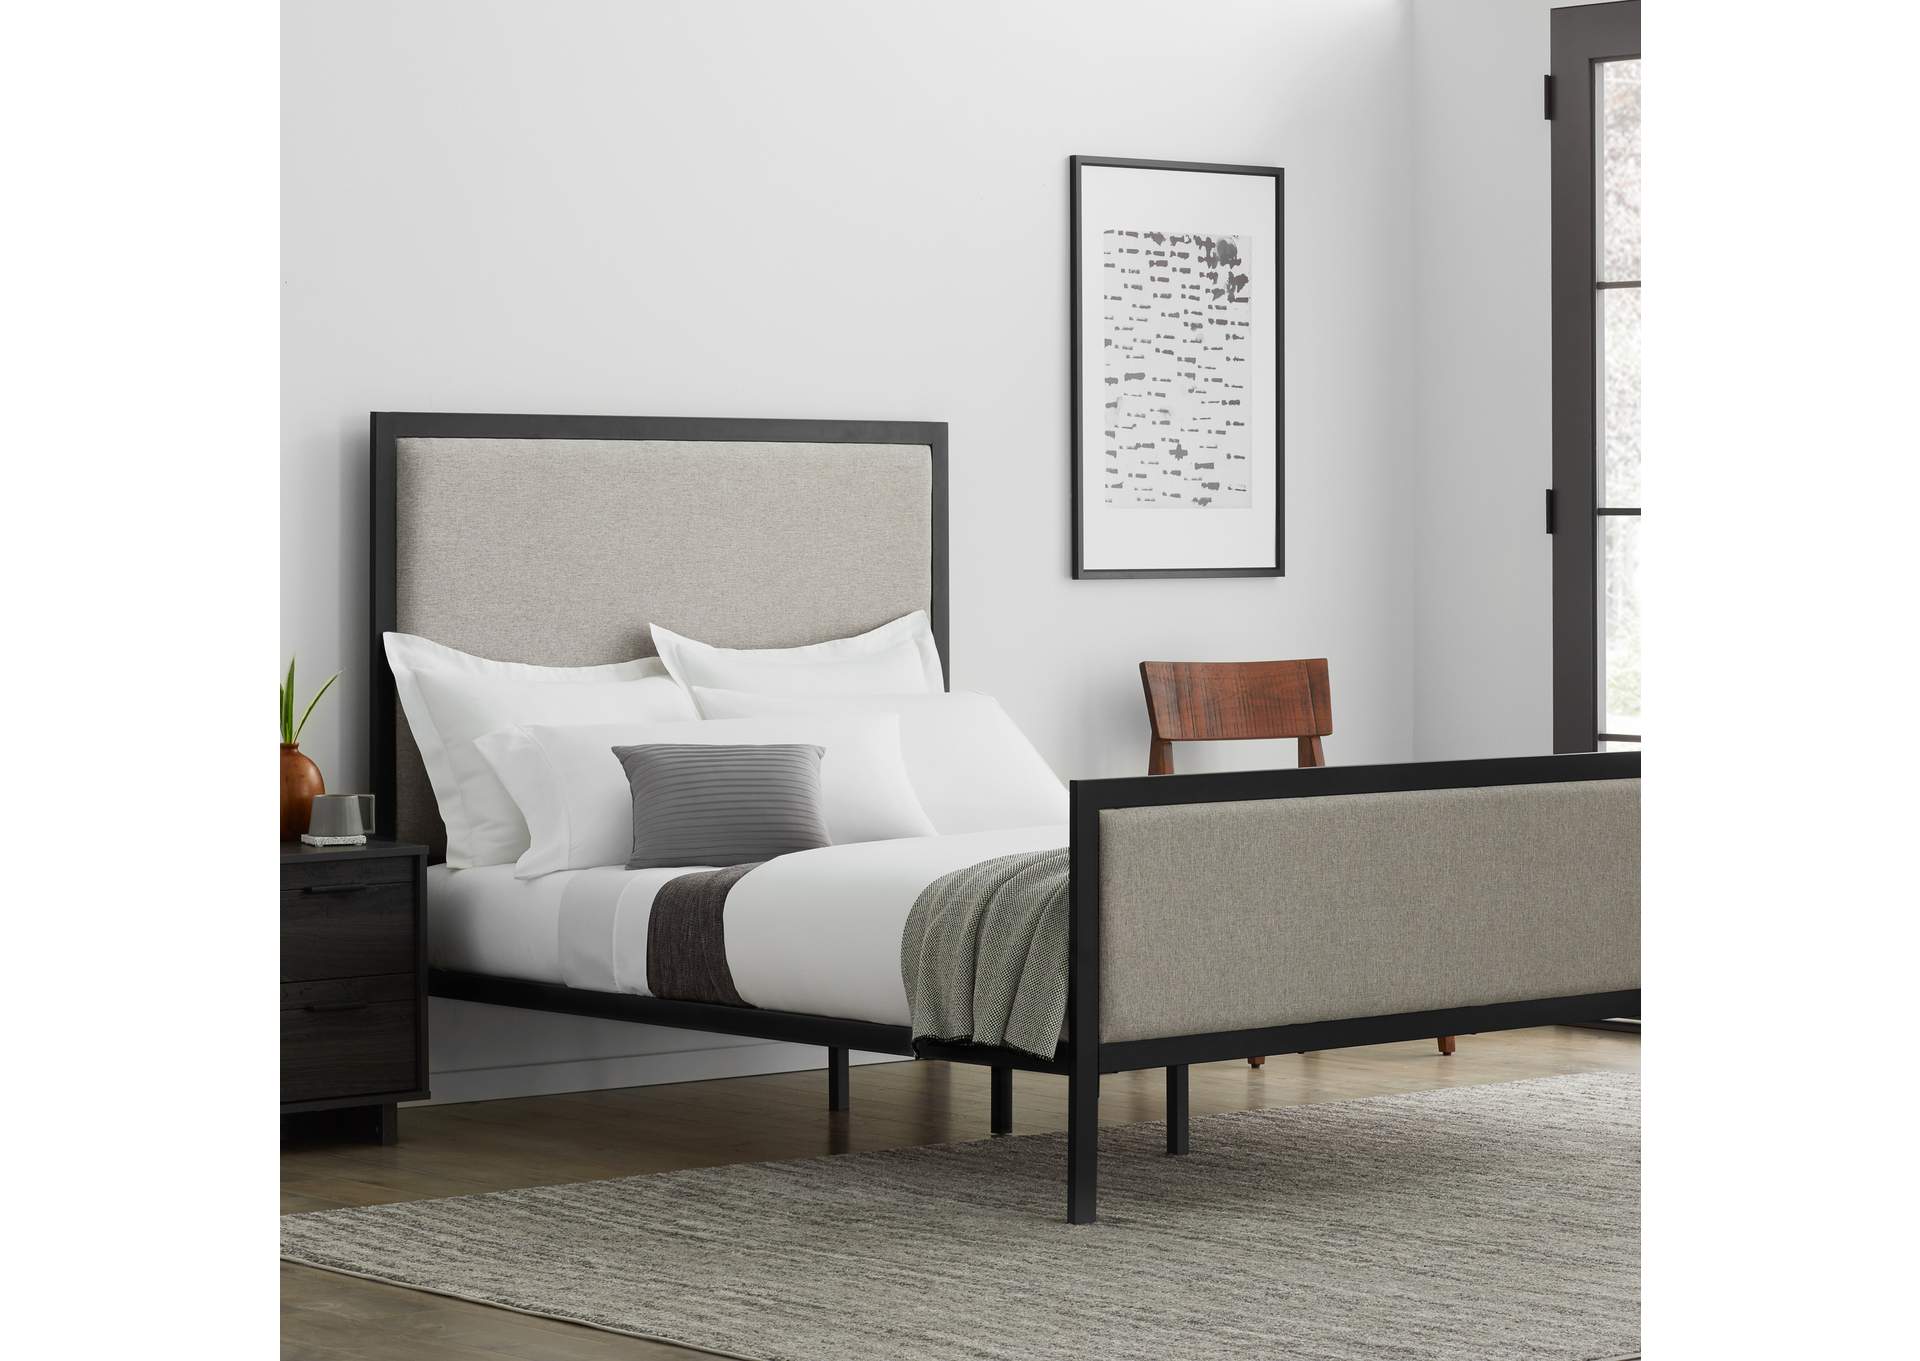 Malouf Charcoal Clarke Metal Upholstered Full Bed,Malouf